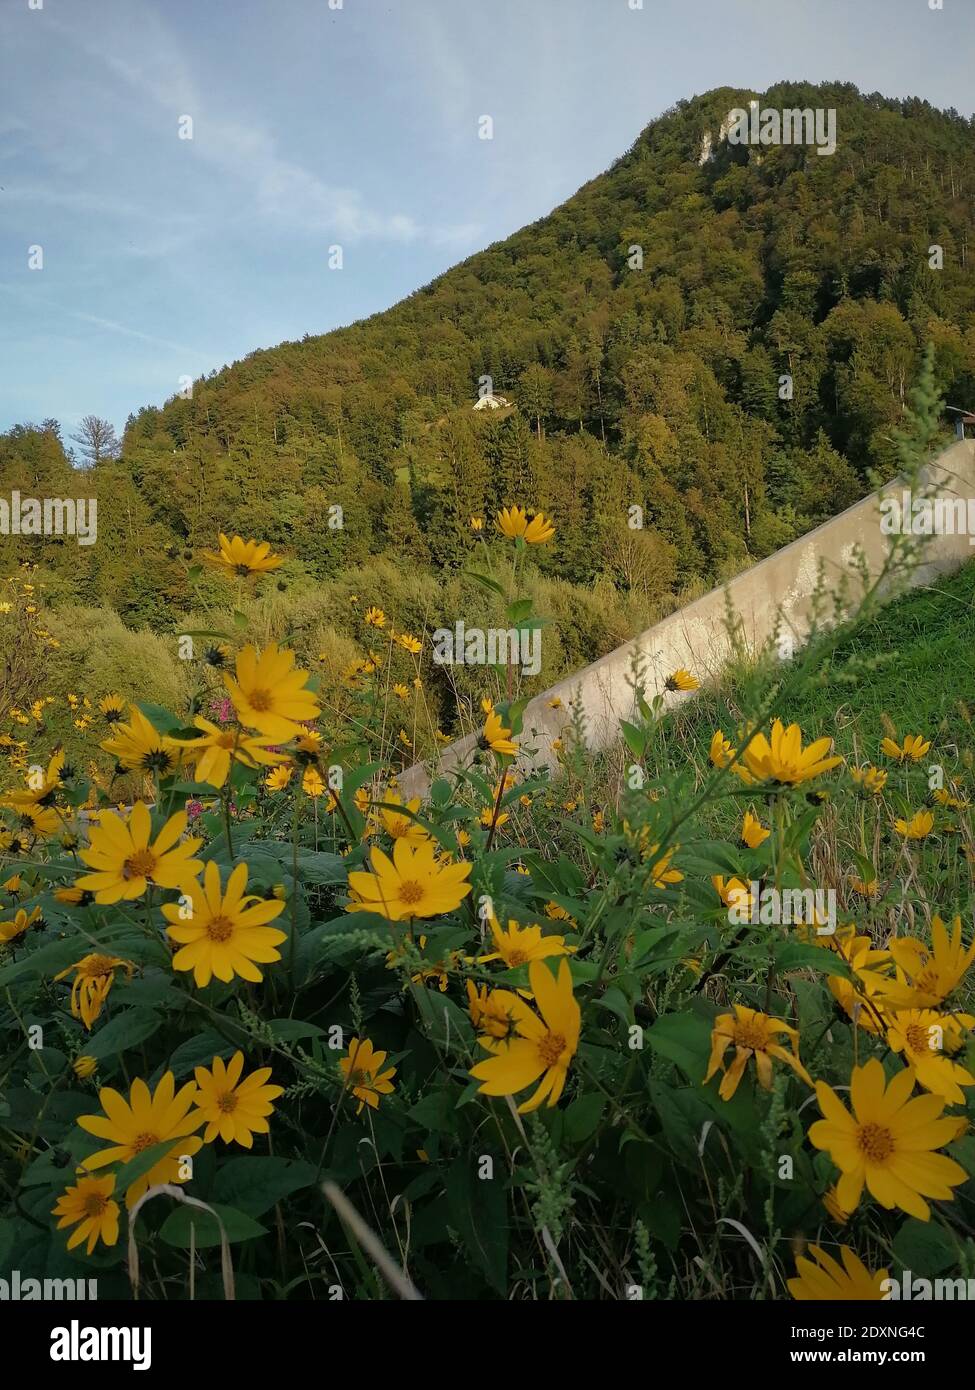 Scenic View Of Yellow Flowering Plants On Mountain Against Sky Stock Photo